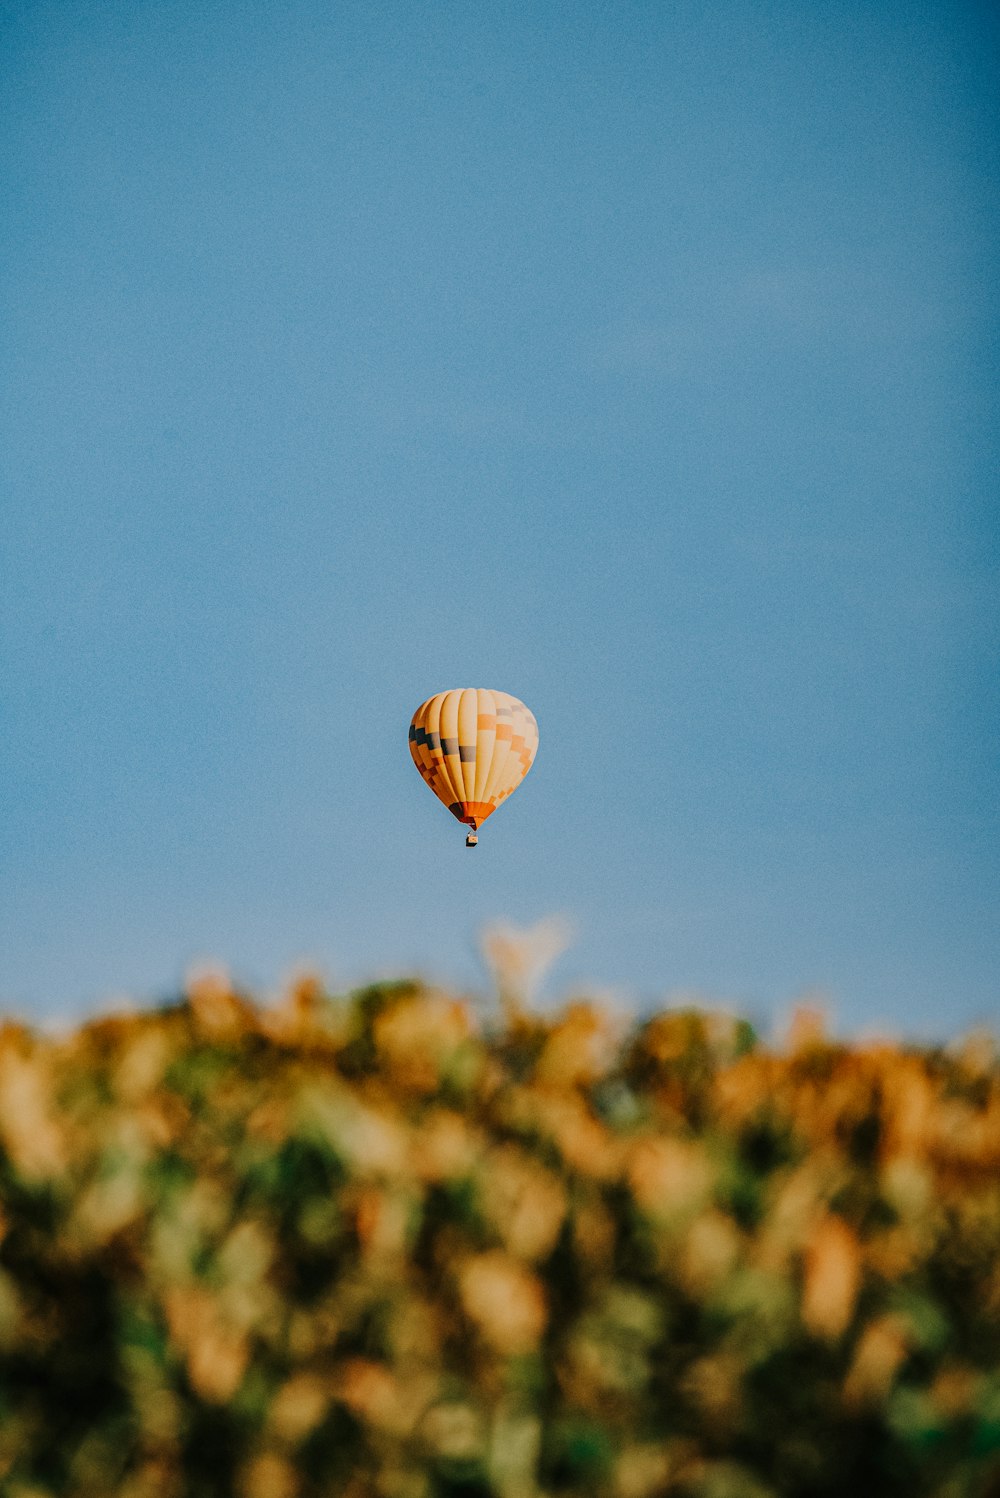 hot air balloon in mid air under blue sky during daytime